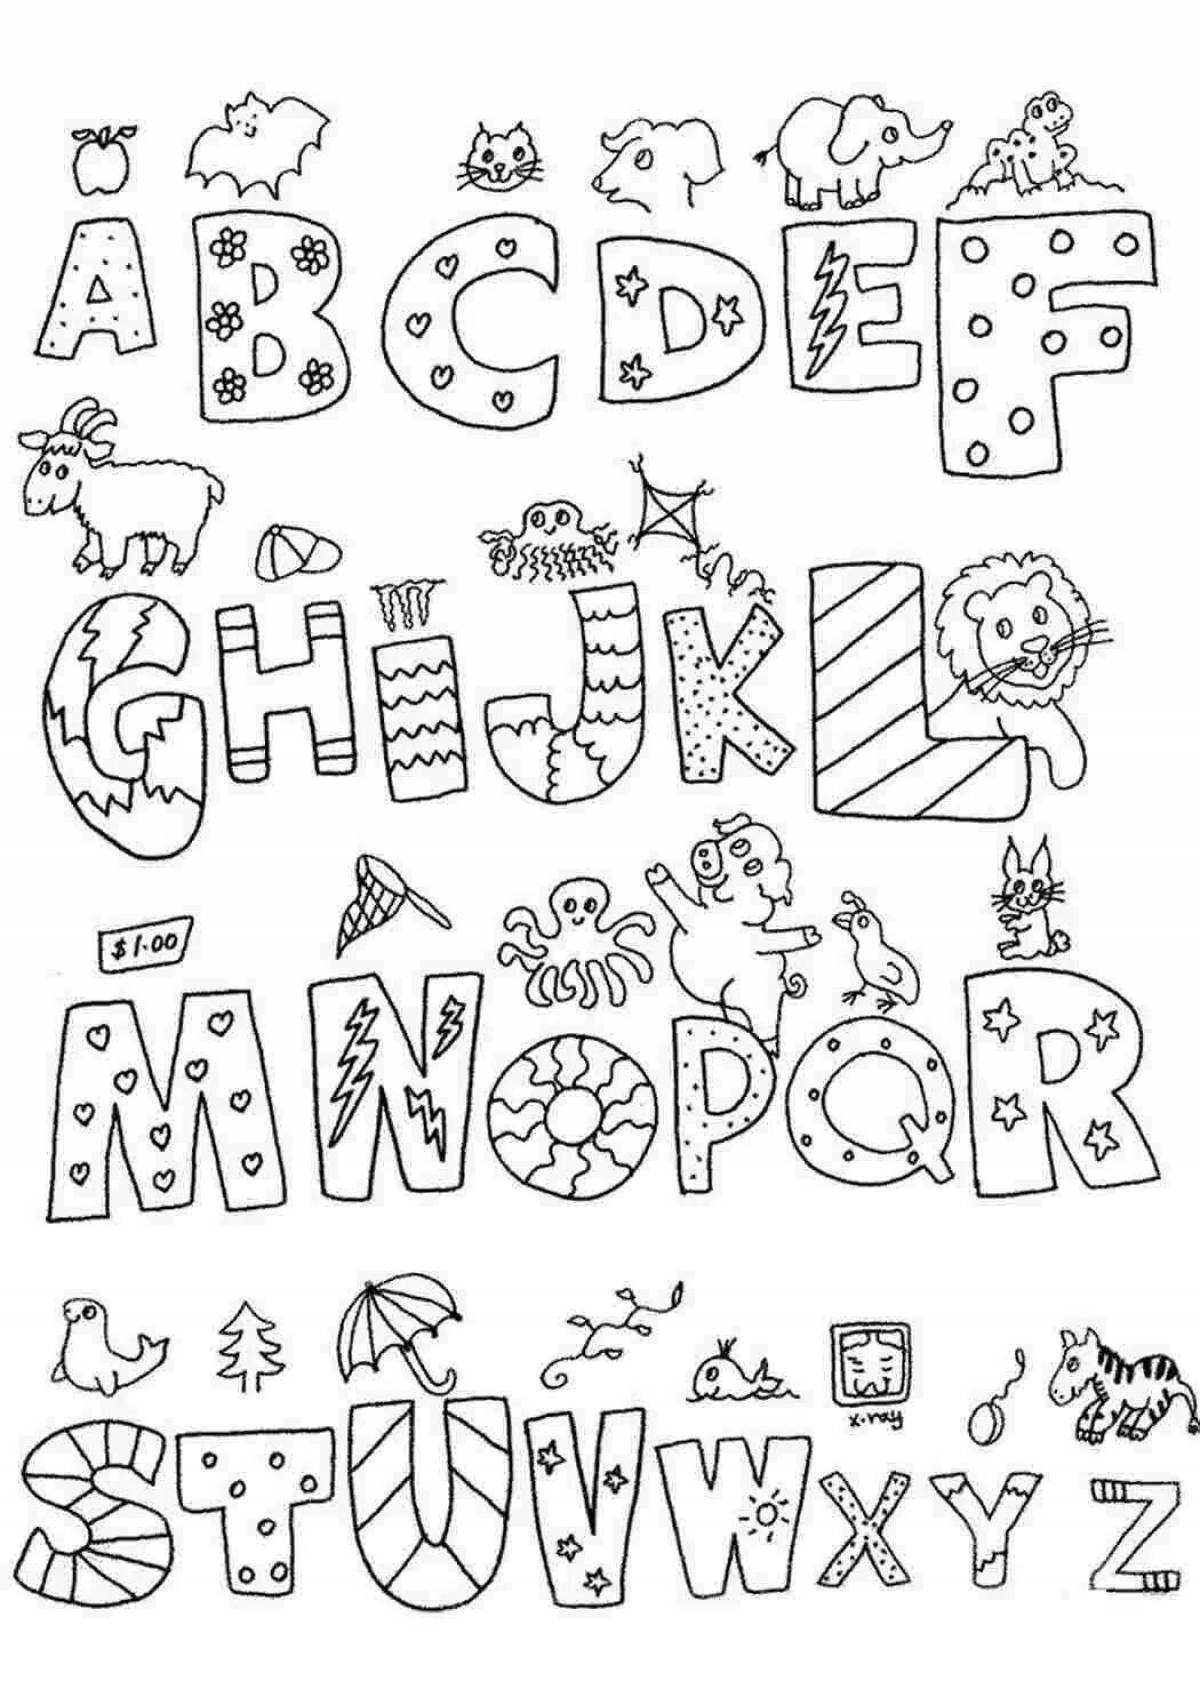 Tempting English food coloring book with alphabet